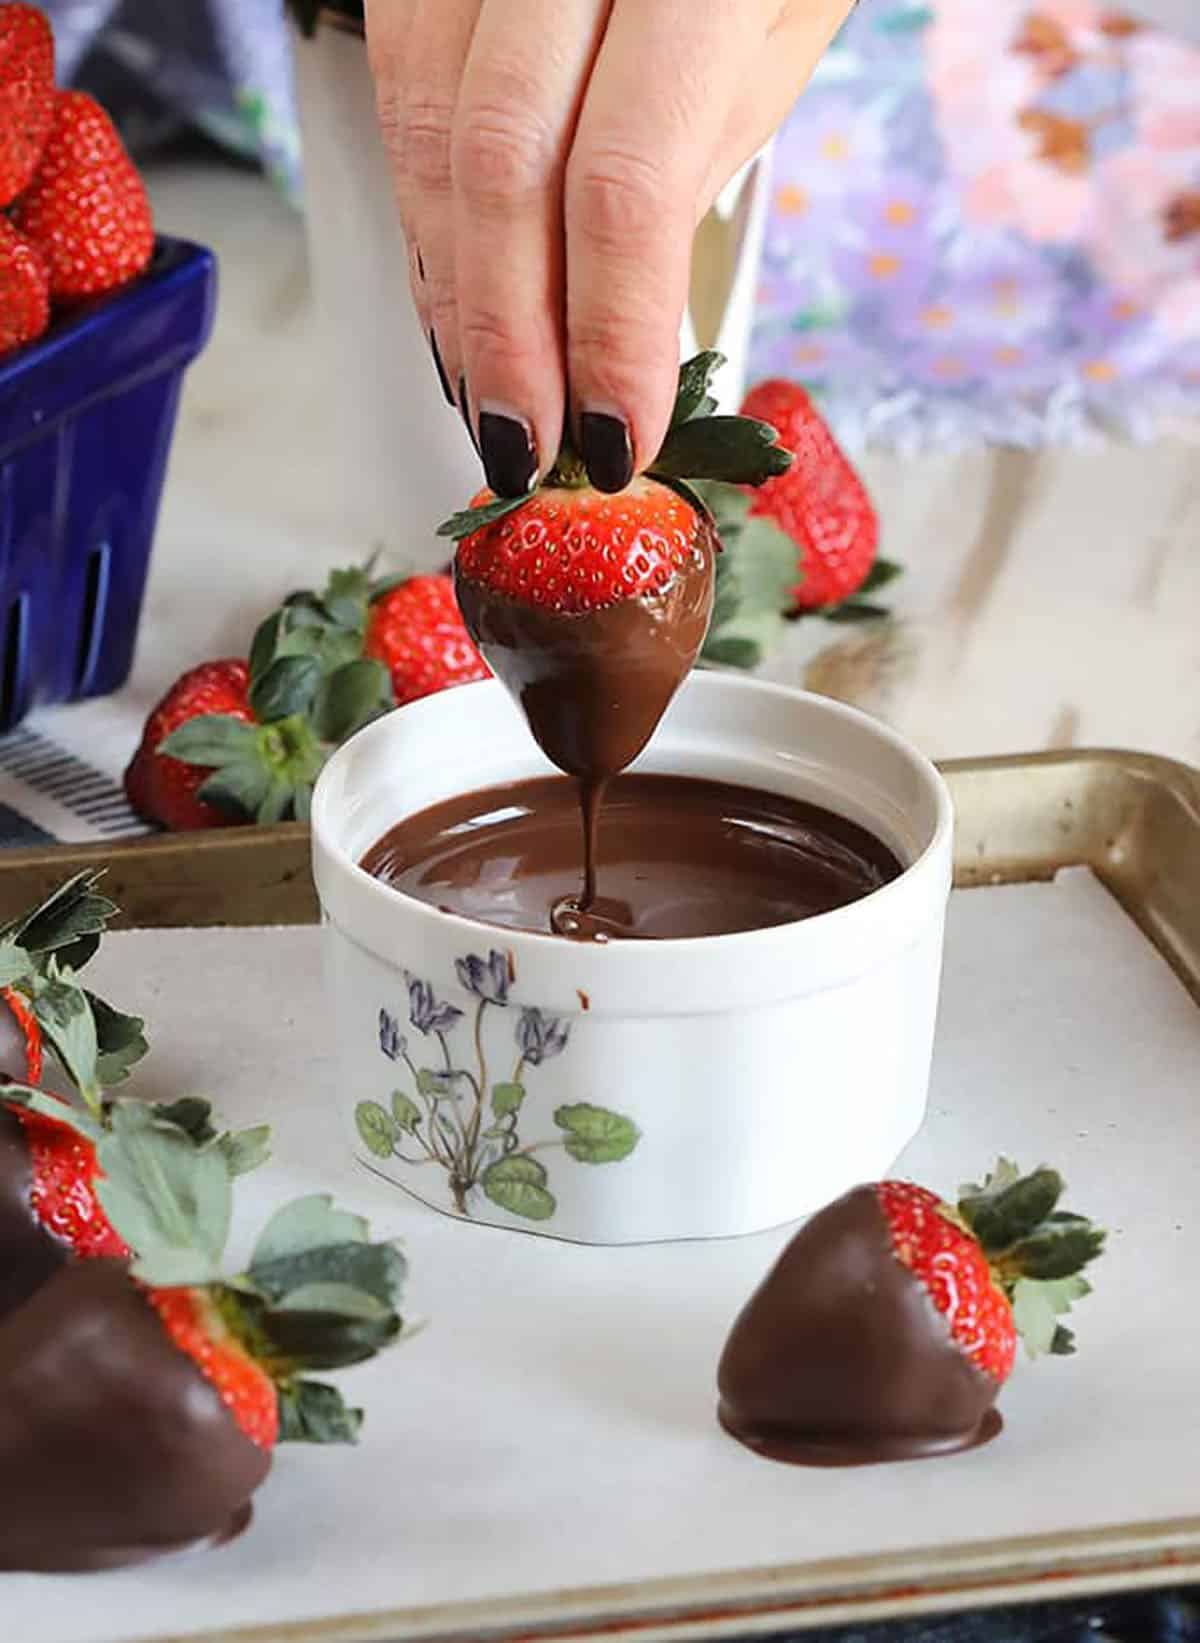 Strawberry being dipped in melted chocolate